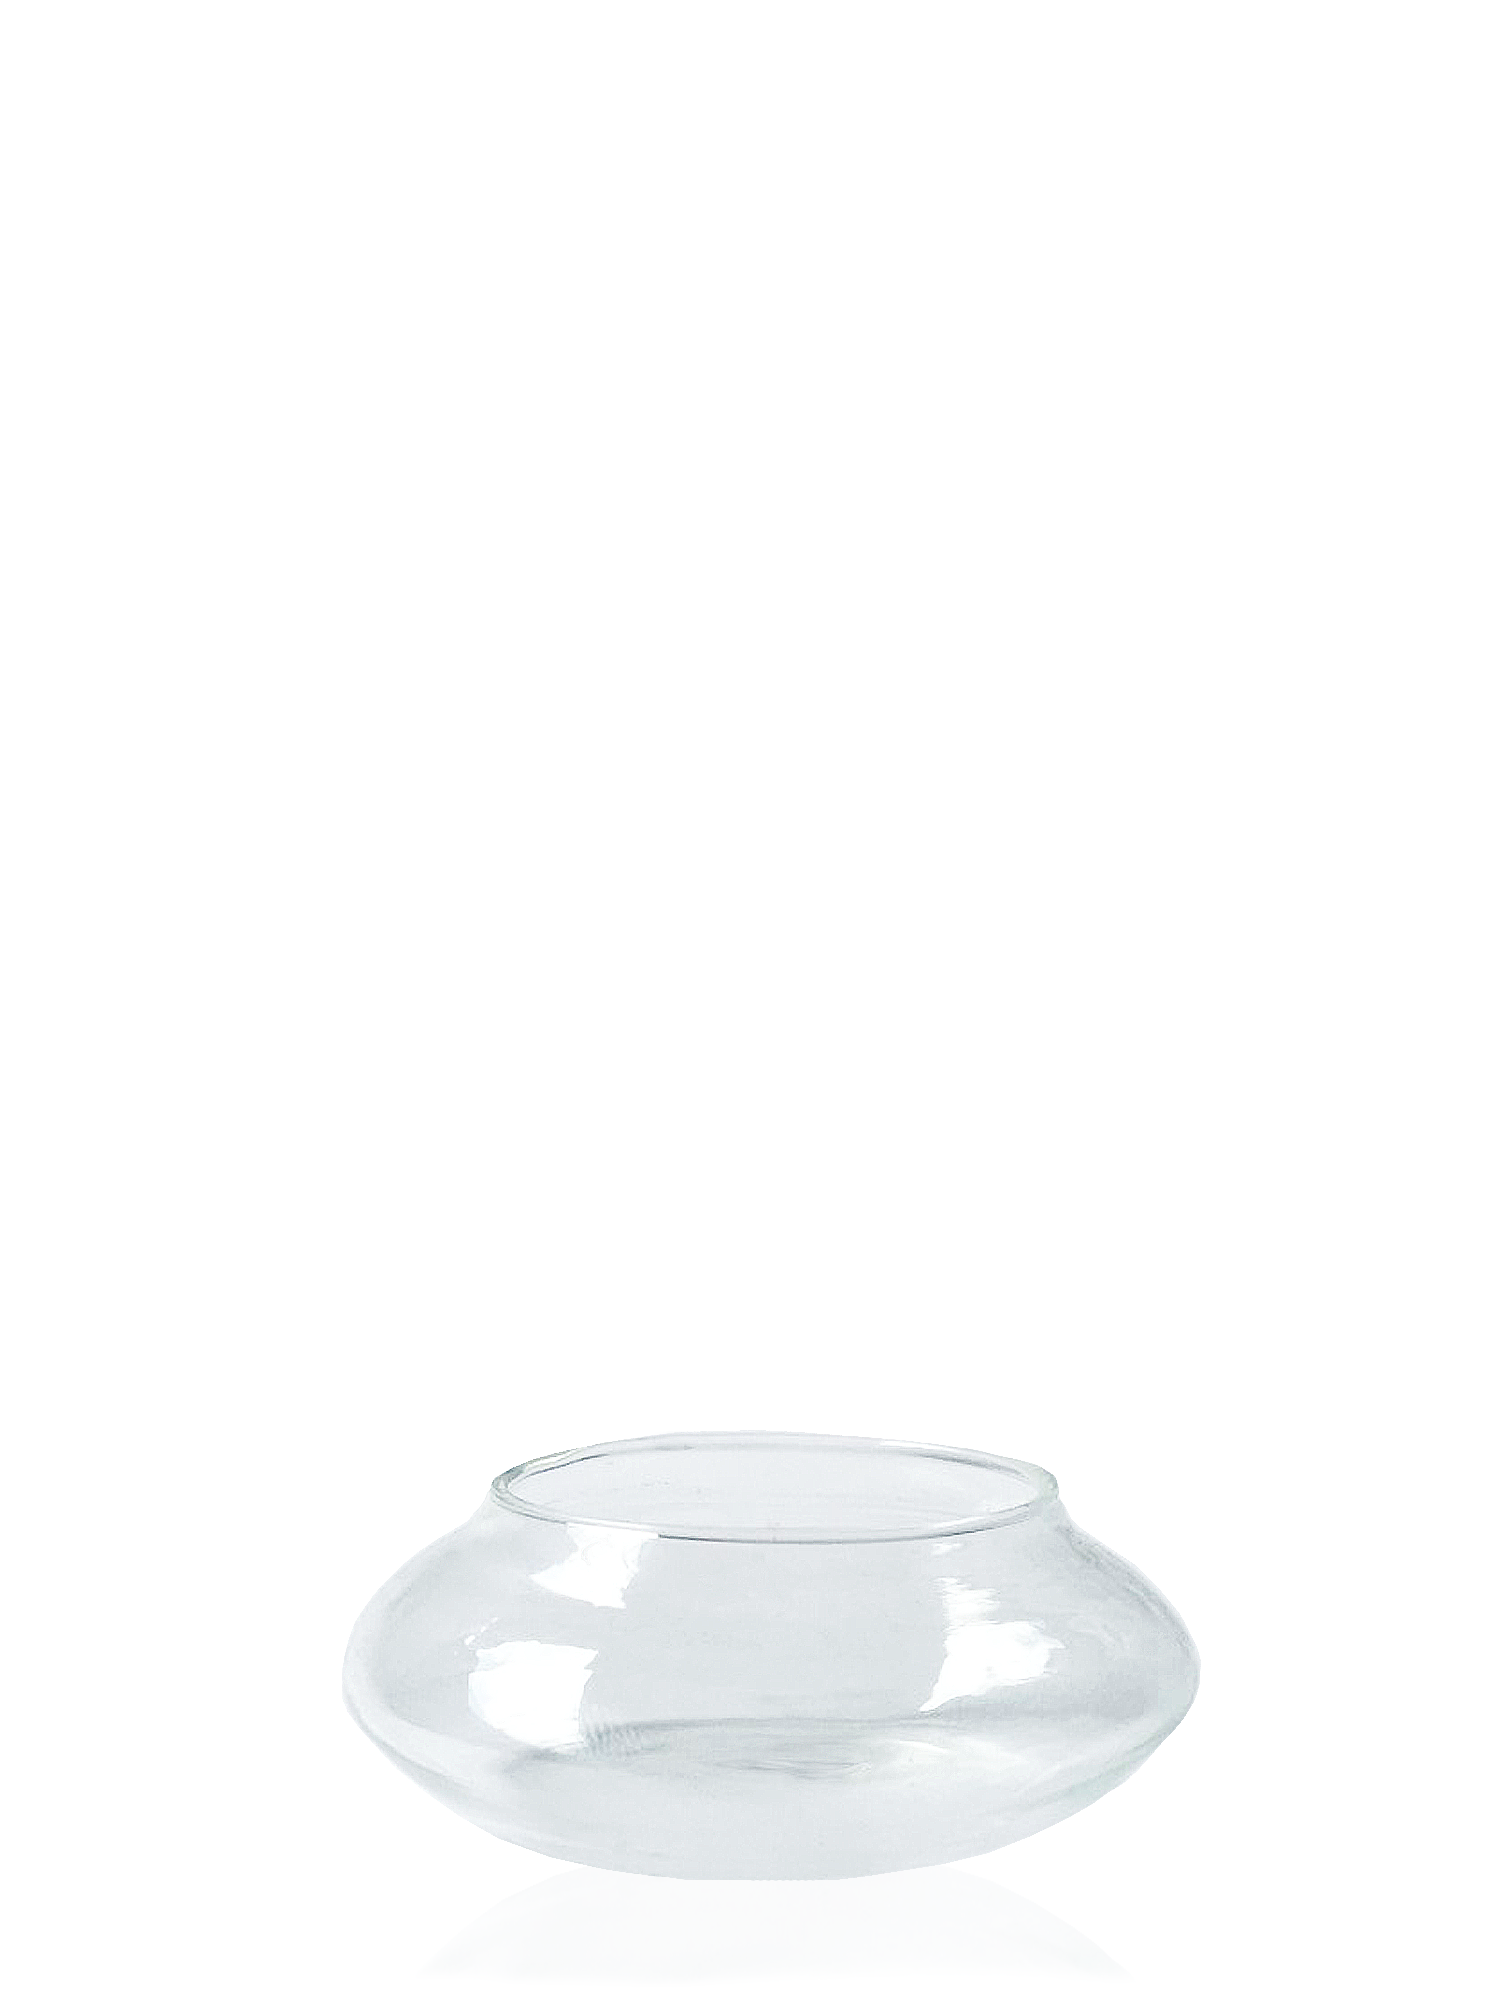 Acrylic Cup Tealight in Floating Holder Pack